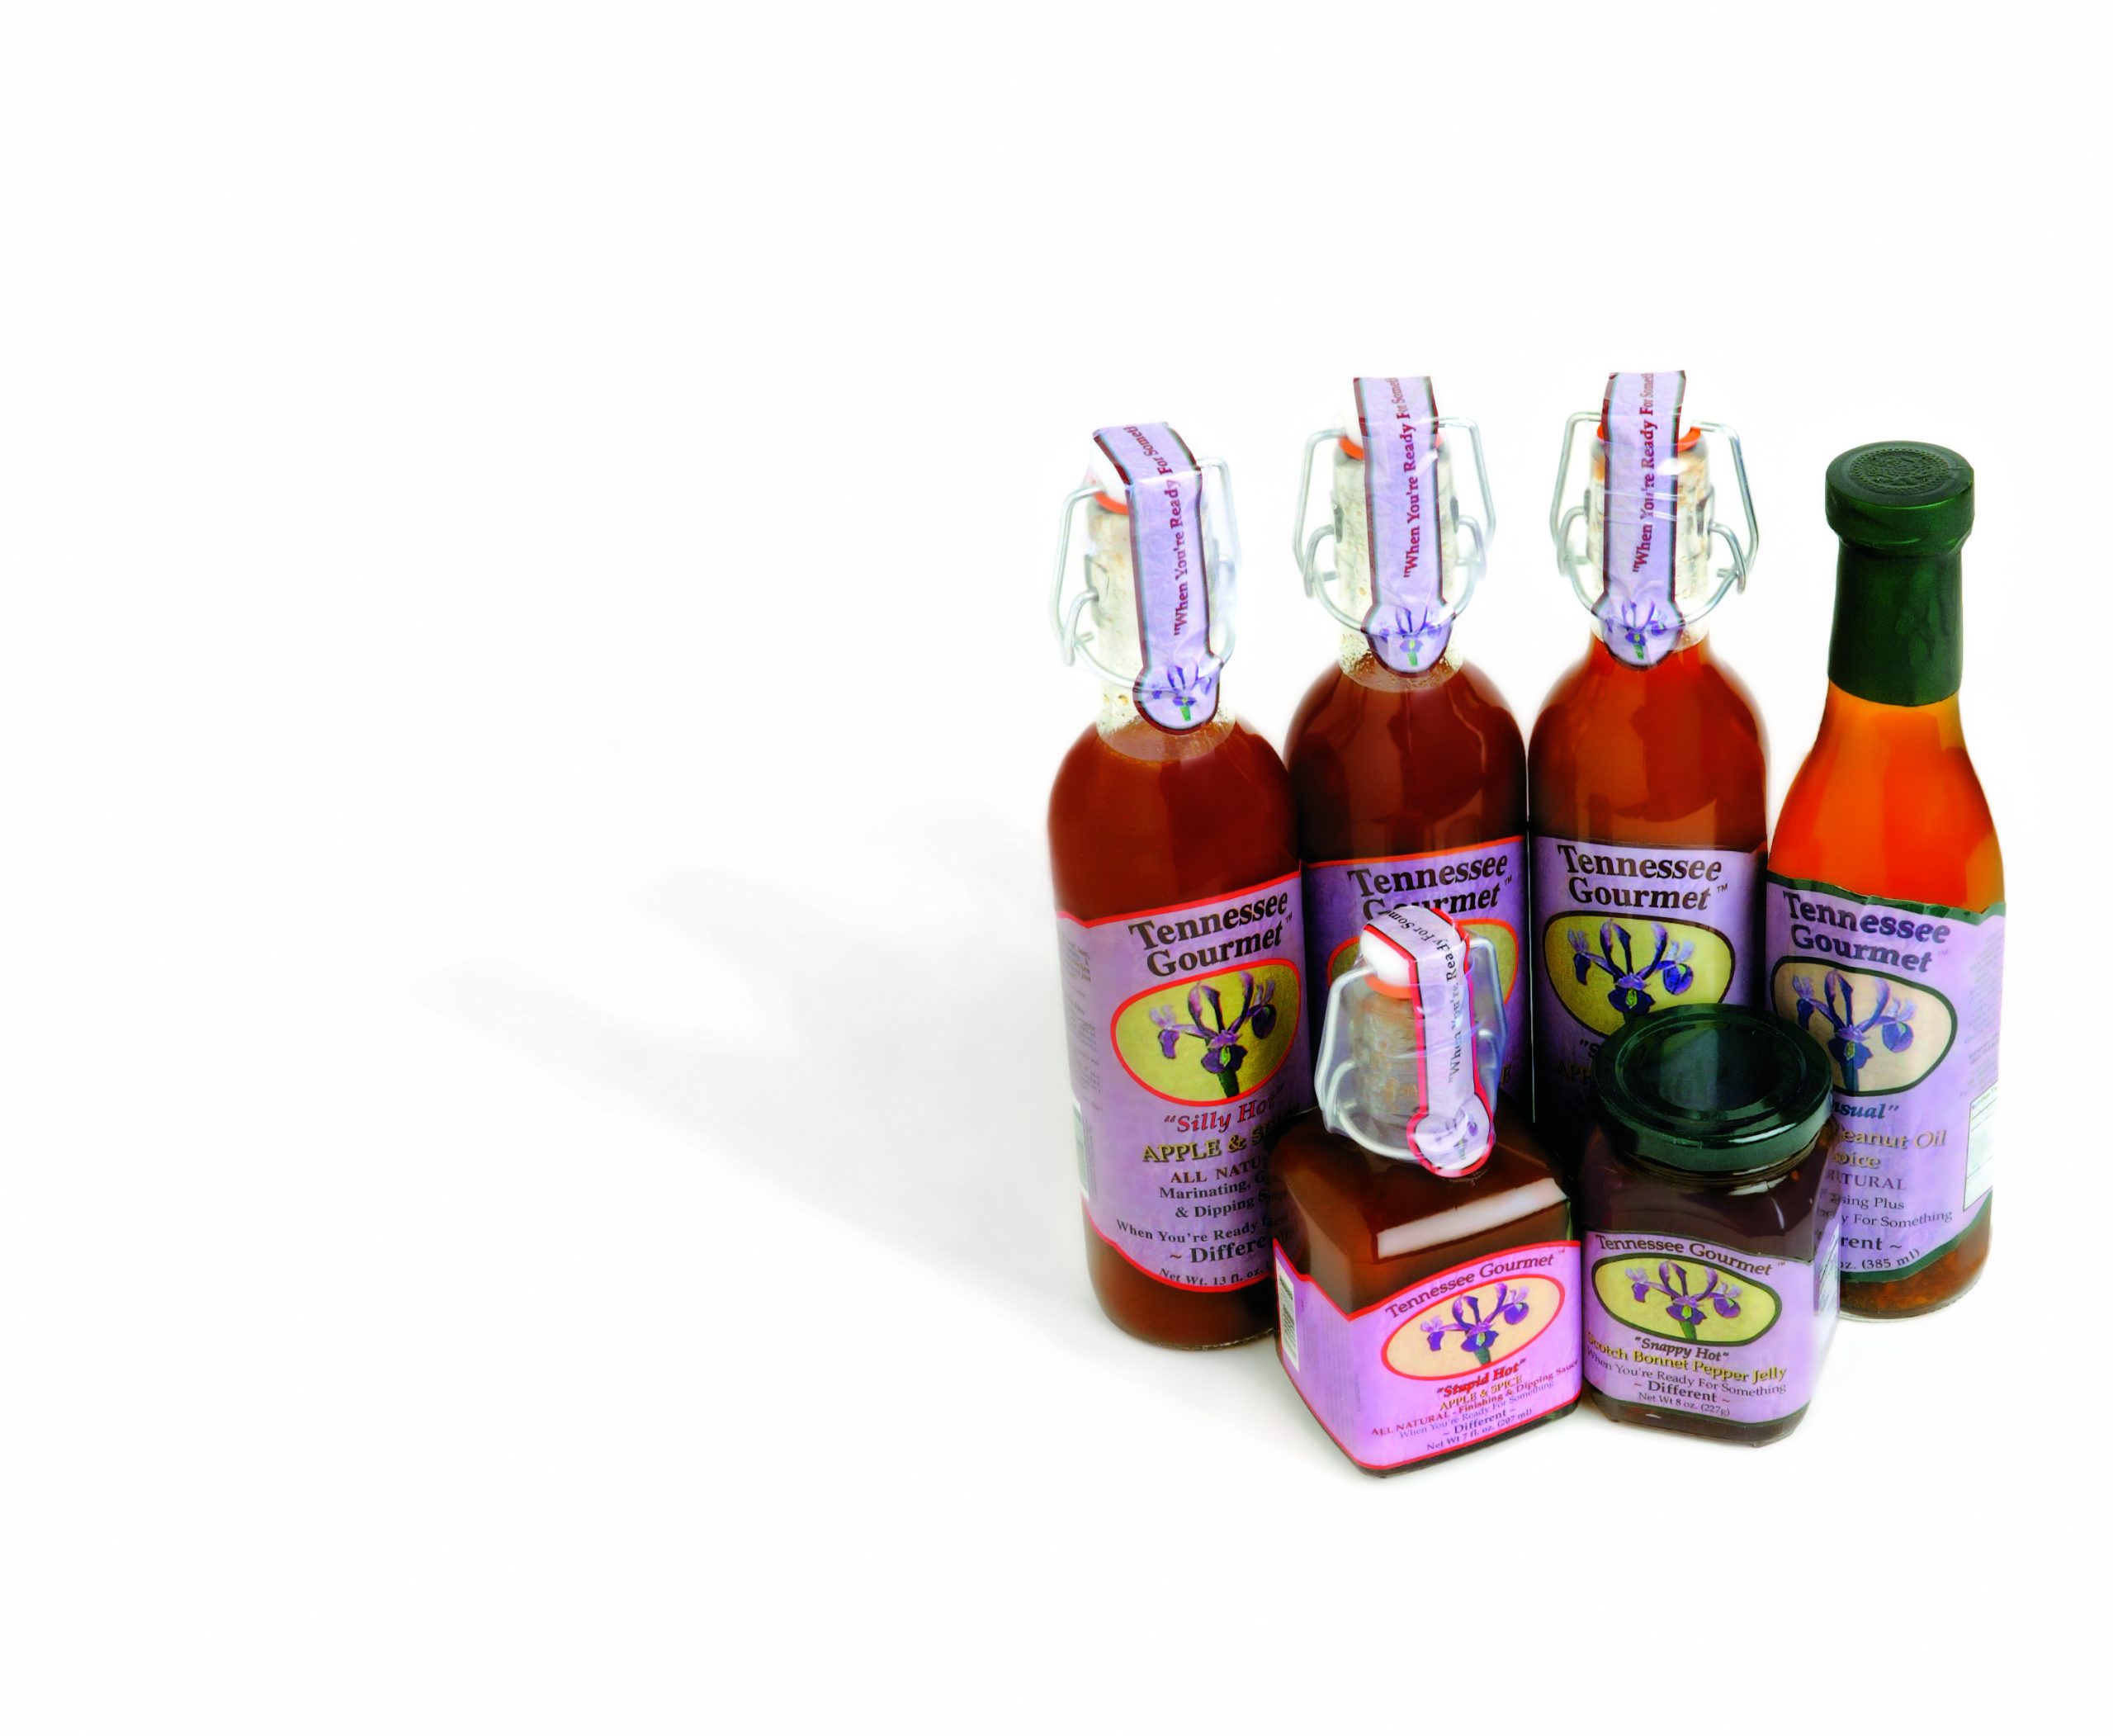 Sauces from Tennessee Gourmet in Mt. Juliet